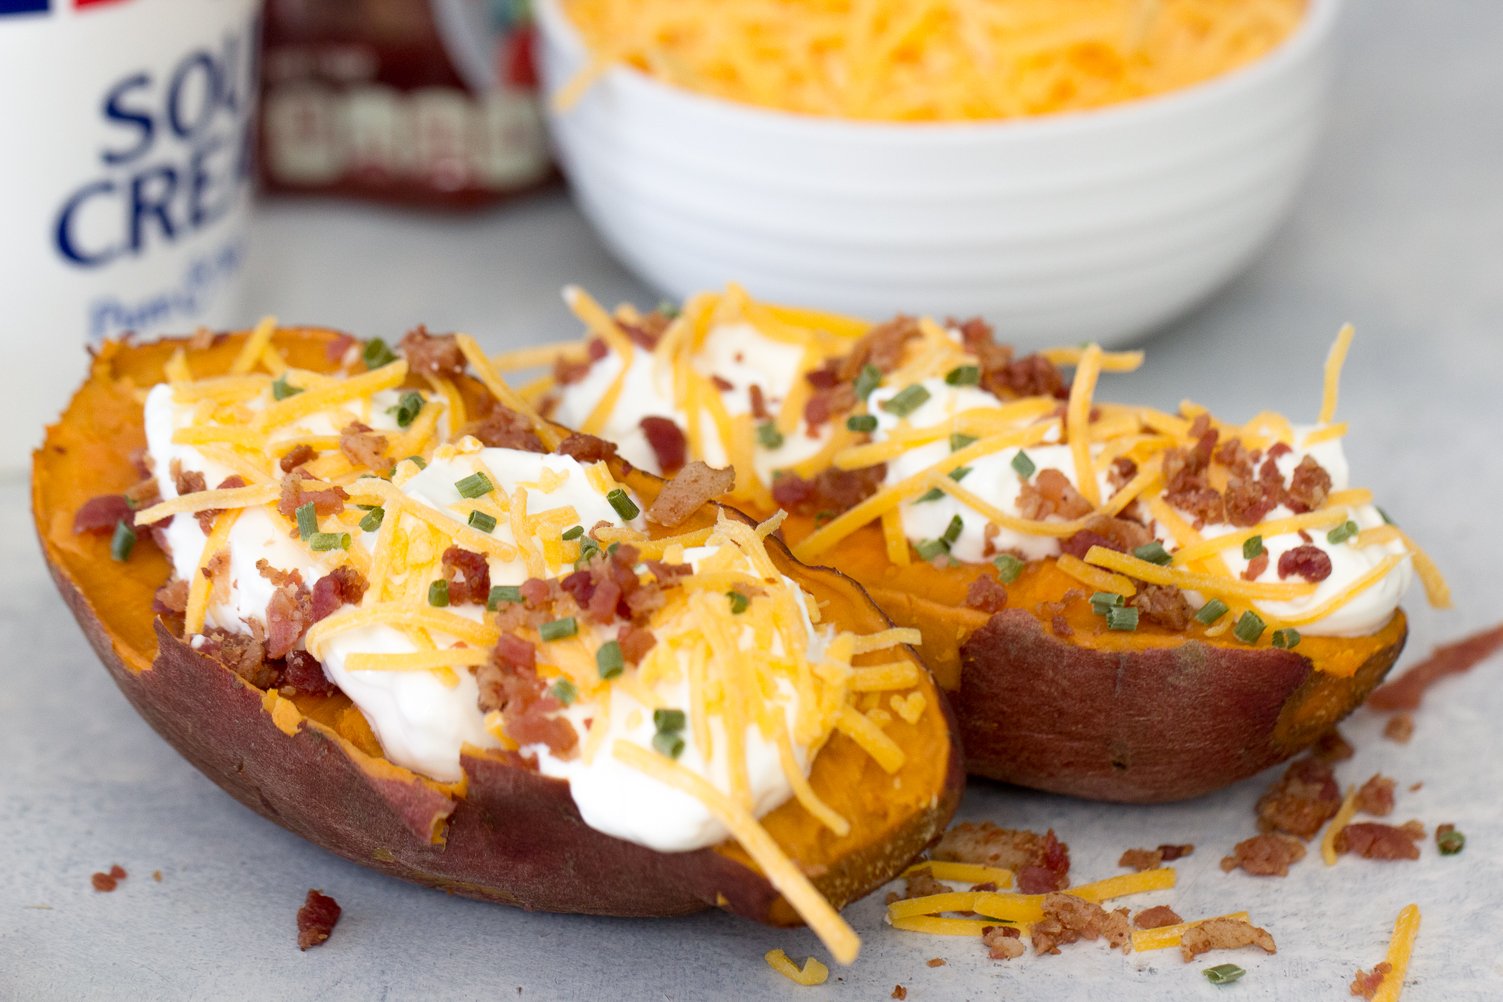 Baked Sweet Potatoes loaded with toppings